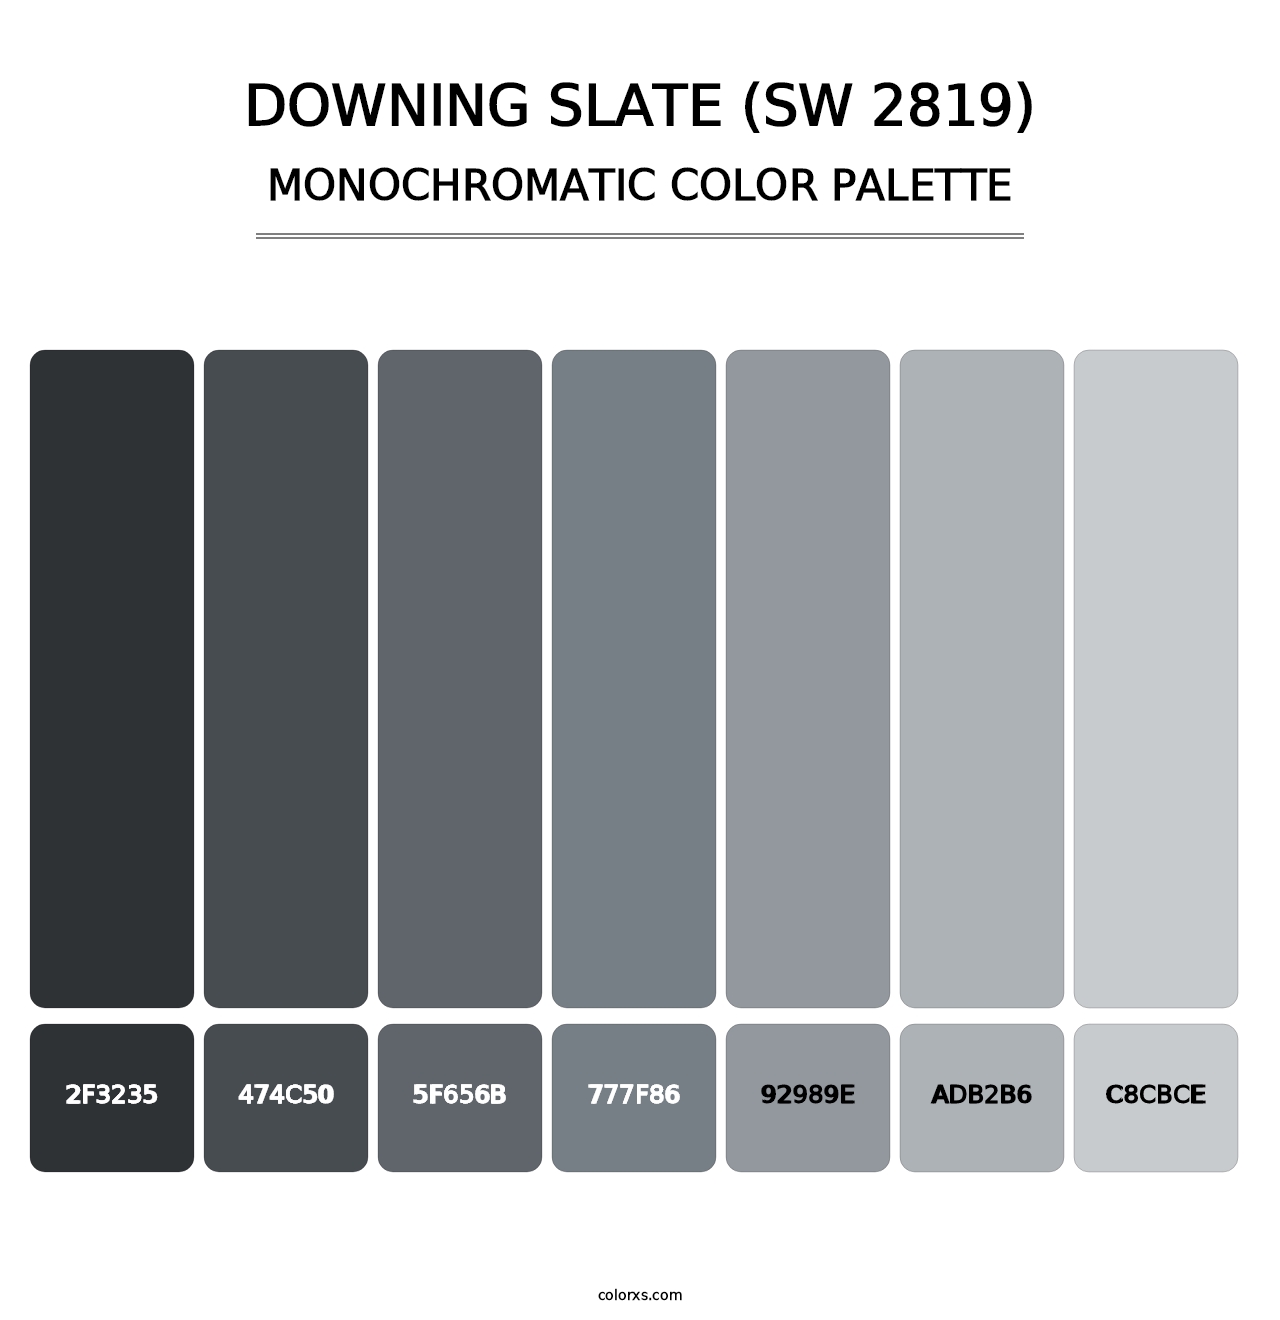 Downing Slate (SW 2819) - Monochromatic Color Palette